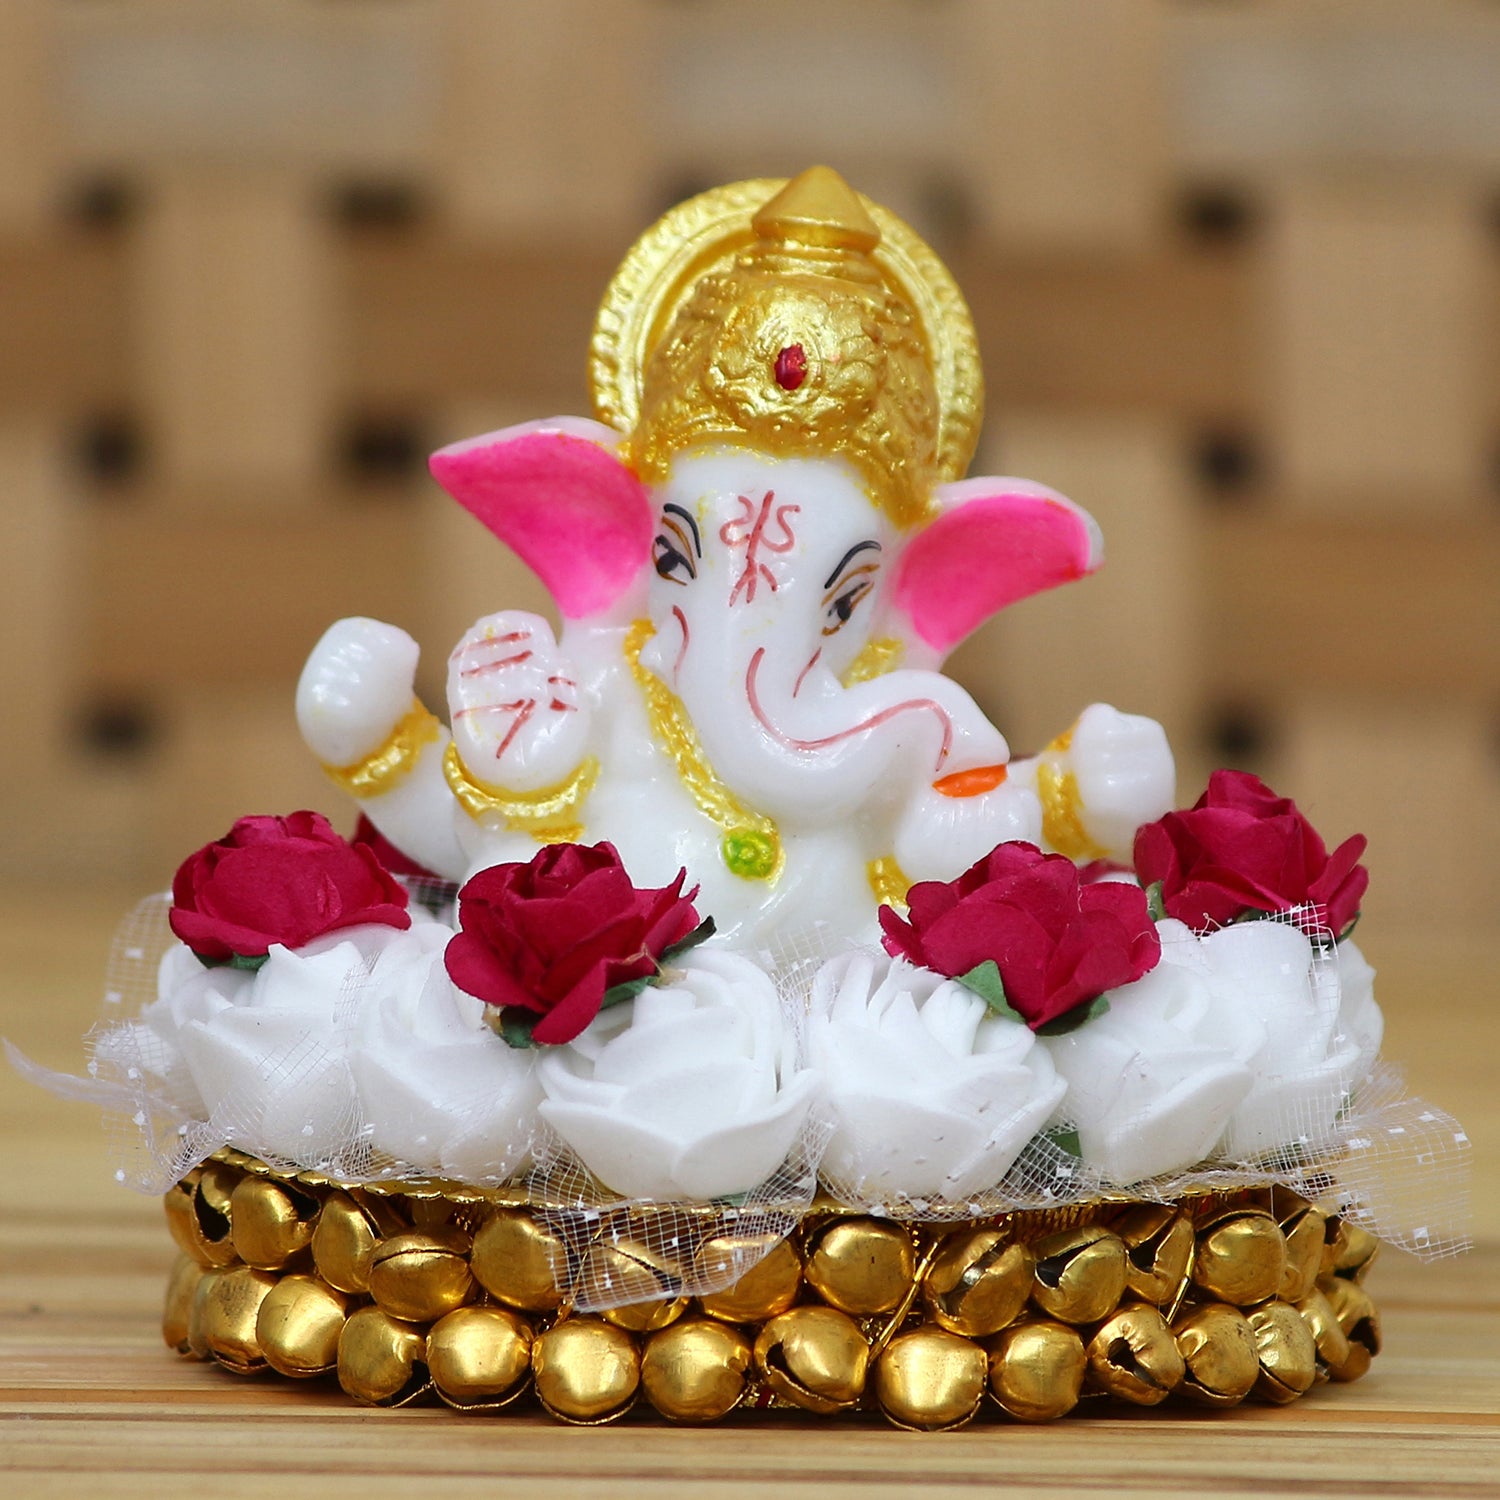 Lord Ganesha Idol on Decorative Handcrafted Plate with White Flowers 1